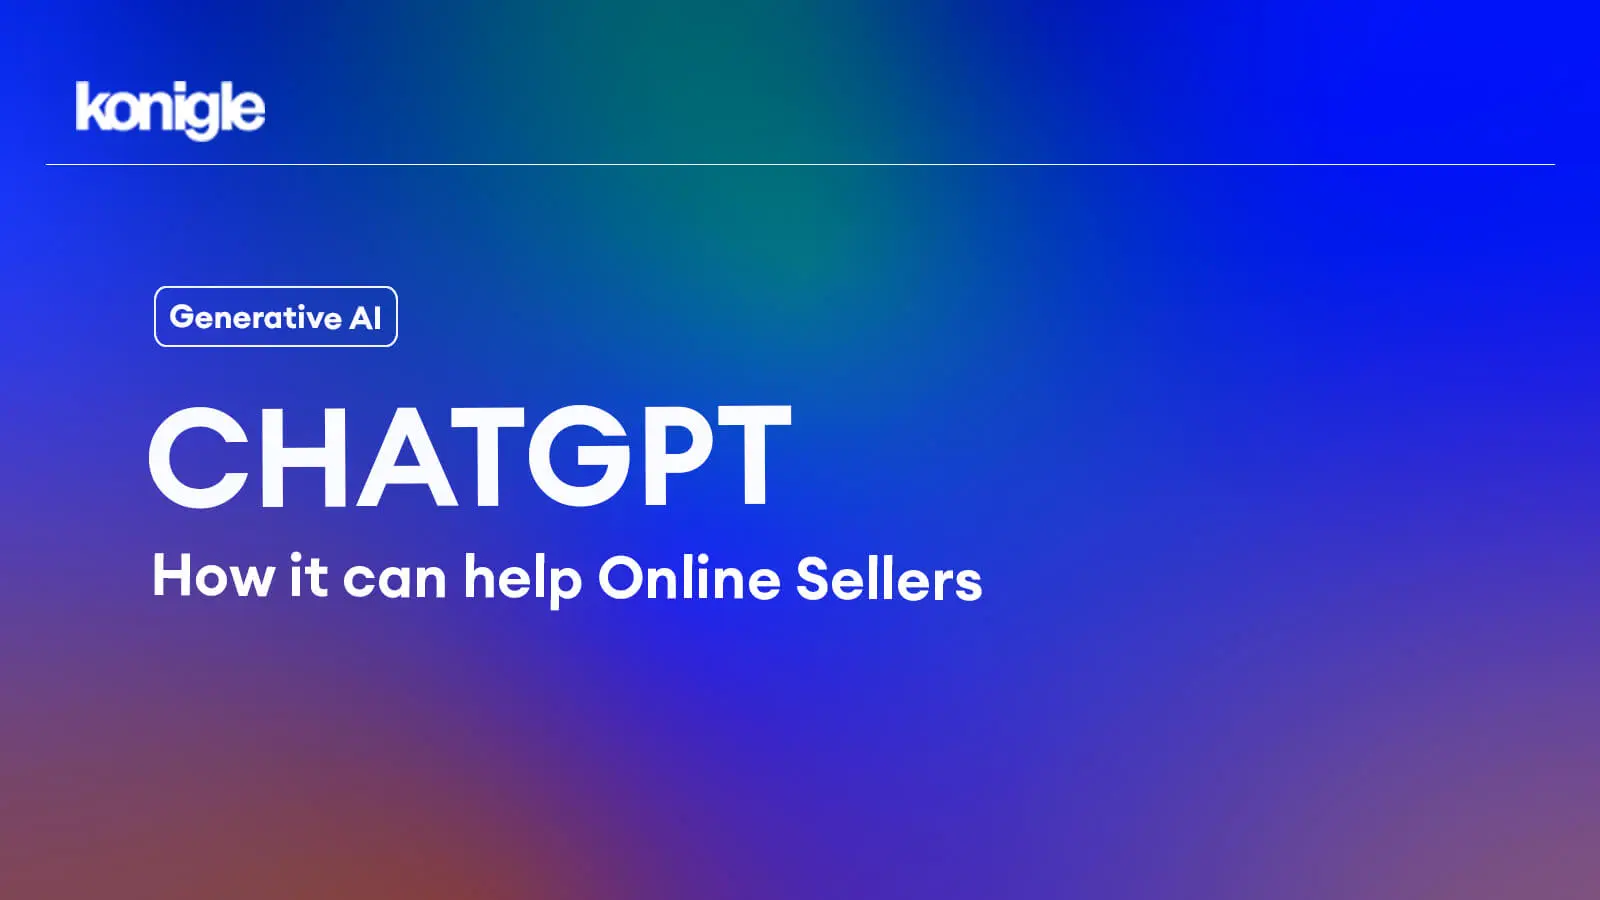 We asked ChatGPT how it can help online sellers ?